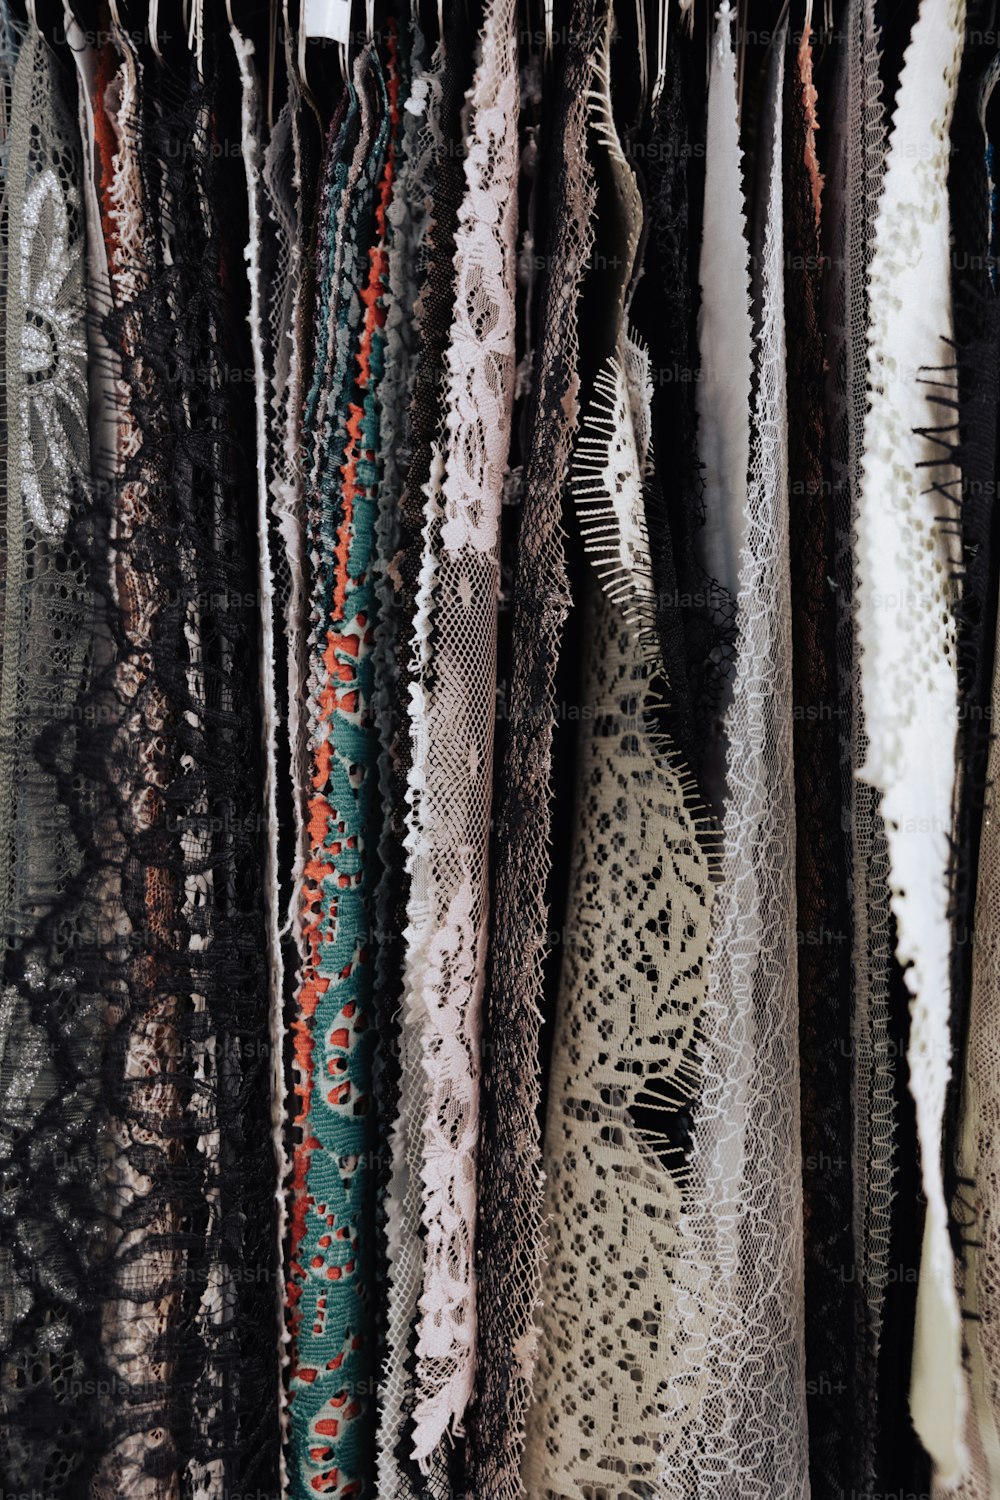 a close up of a rack of scarves